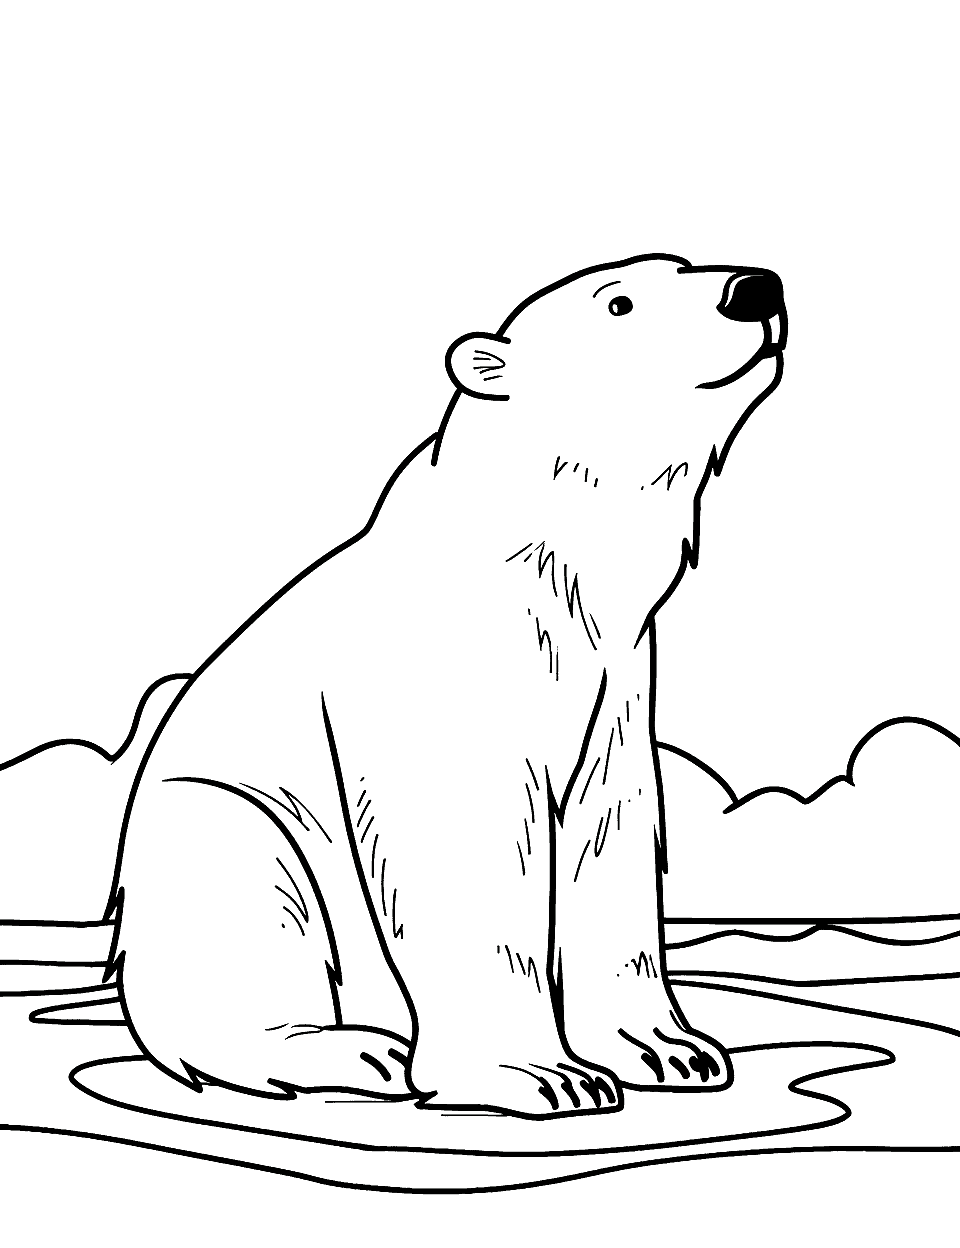 Thoughtful Polar Bear Coloring Page - A polar bear sitting and staring thoughtfully at the sky.